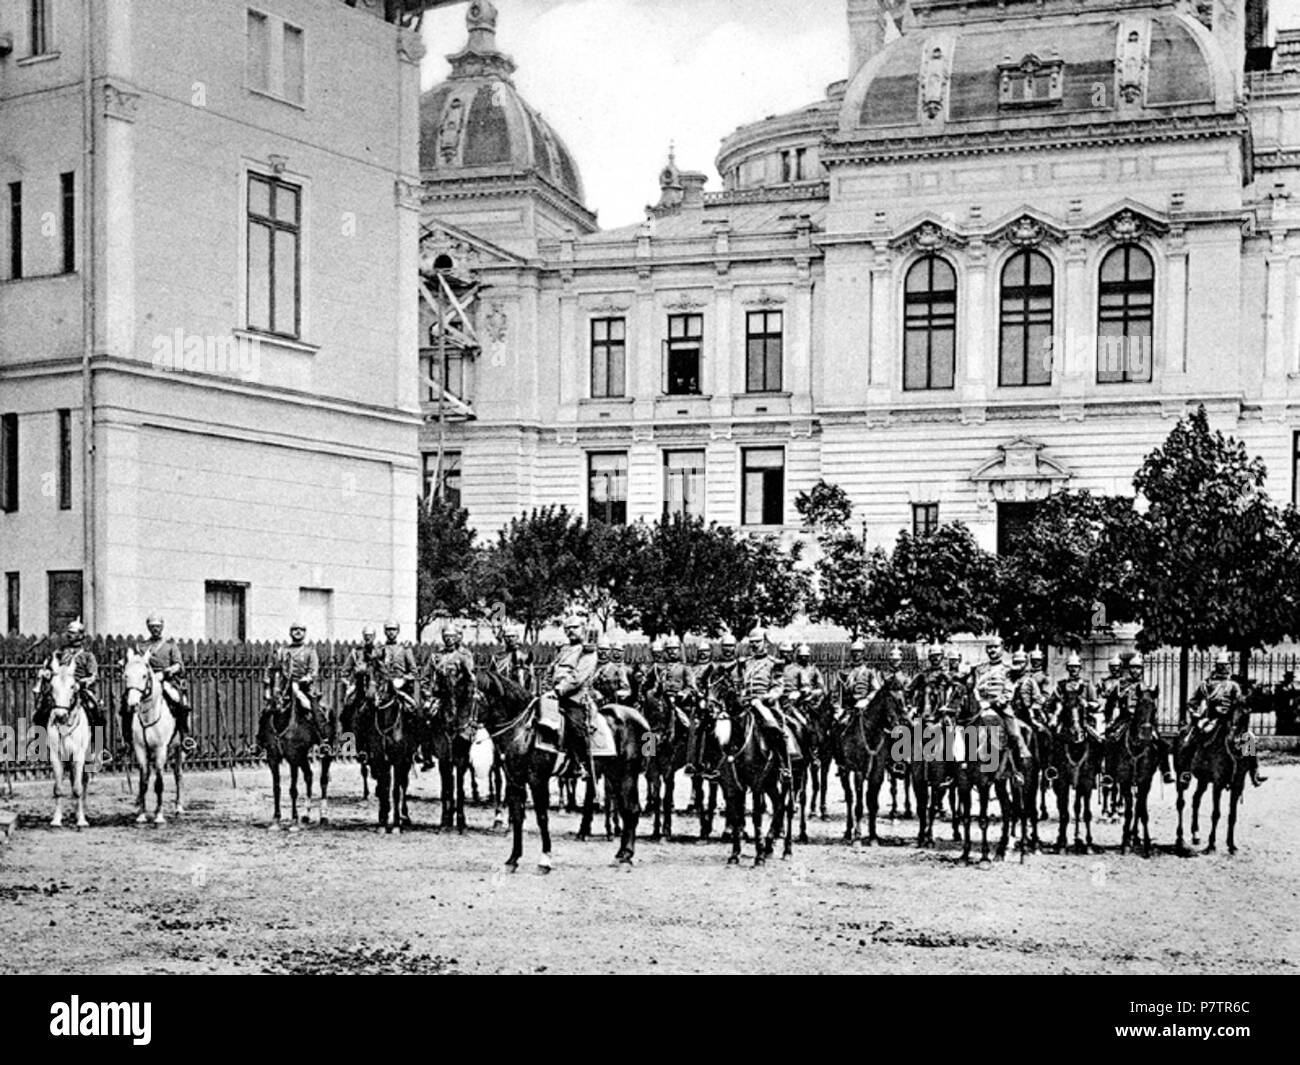 English: Back view of the CEC Palace and the royal guard. Source and author Author:   Alexandru Antoniu  (1860–1925)    Description Romanian photographer  Date of birth/death circa 1860 1925  Work period 1890–1904  Work location Bucharest  Authority control  : Q33132969    Source: Album general al României - compus din 300 tablouri reprezentând monumentele istorice i contimporane, posiiuni pitoresci, Domeniul Coroanei i costume naionale cu descrierea istoric i pitoreasc, Dresden: C.G.Räder, 1901-1904  This is a photo of a historic monument in Bucureti, classified with number B-II-m-A-19845  .  Stock Photo